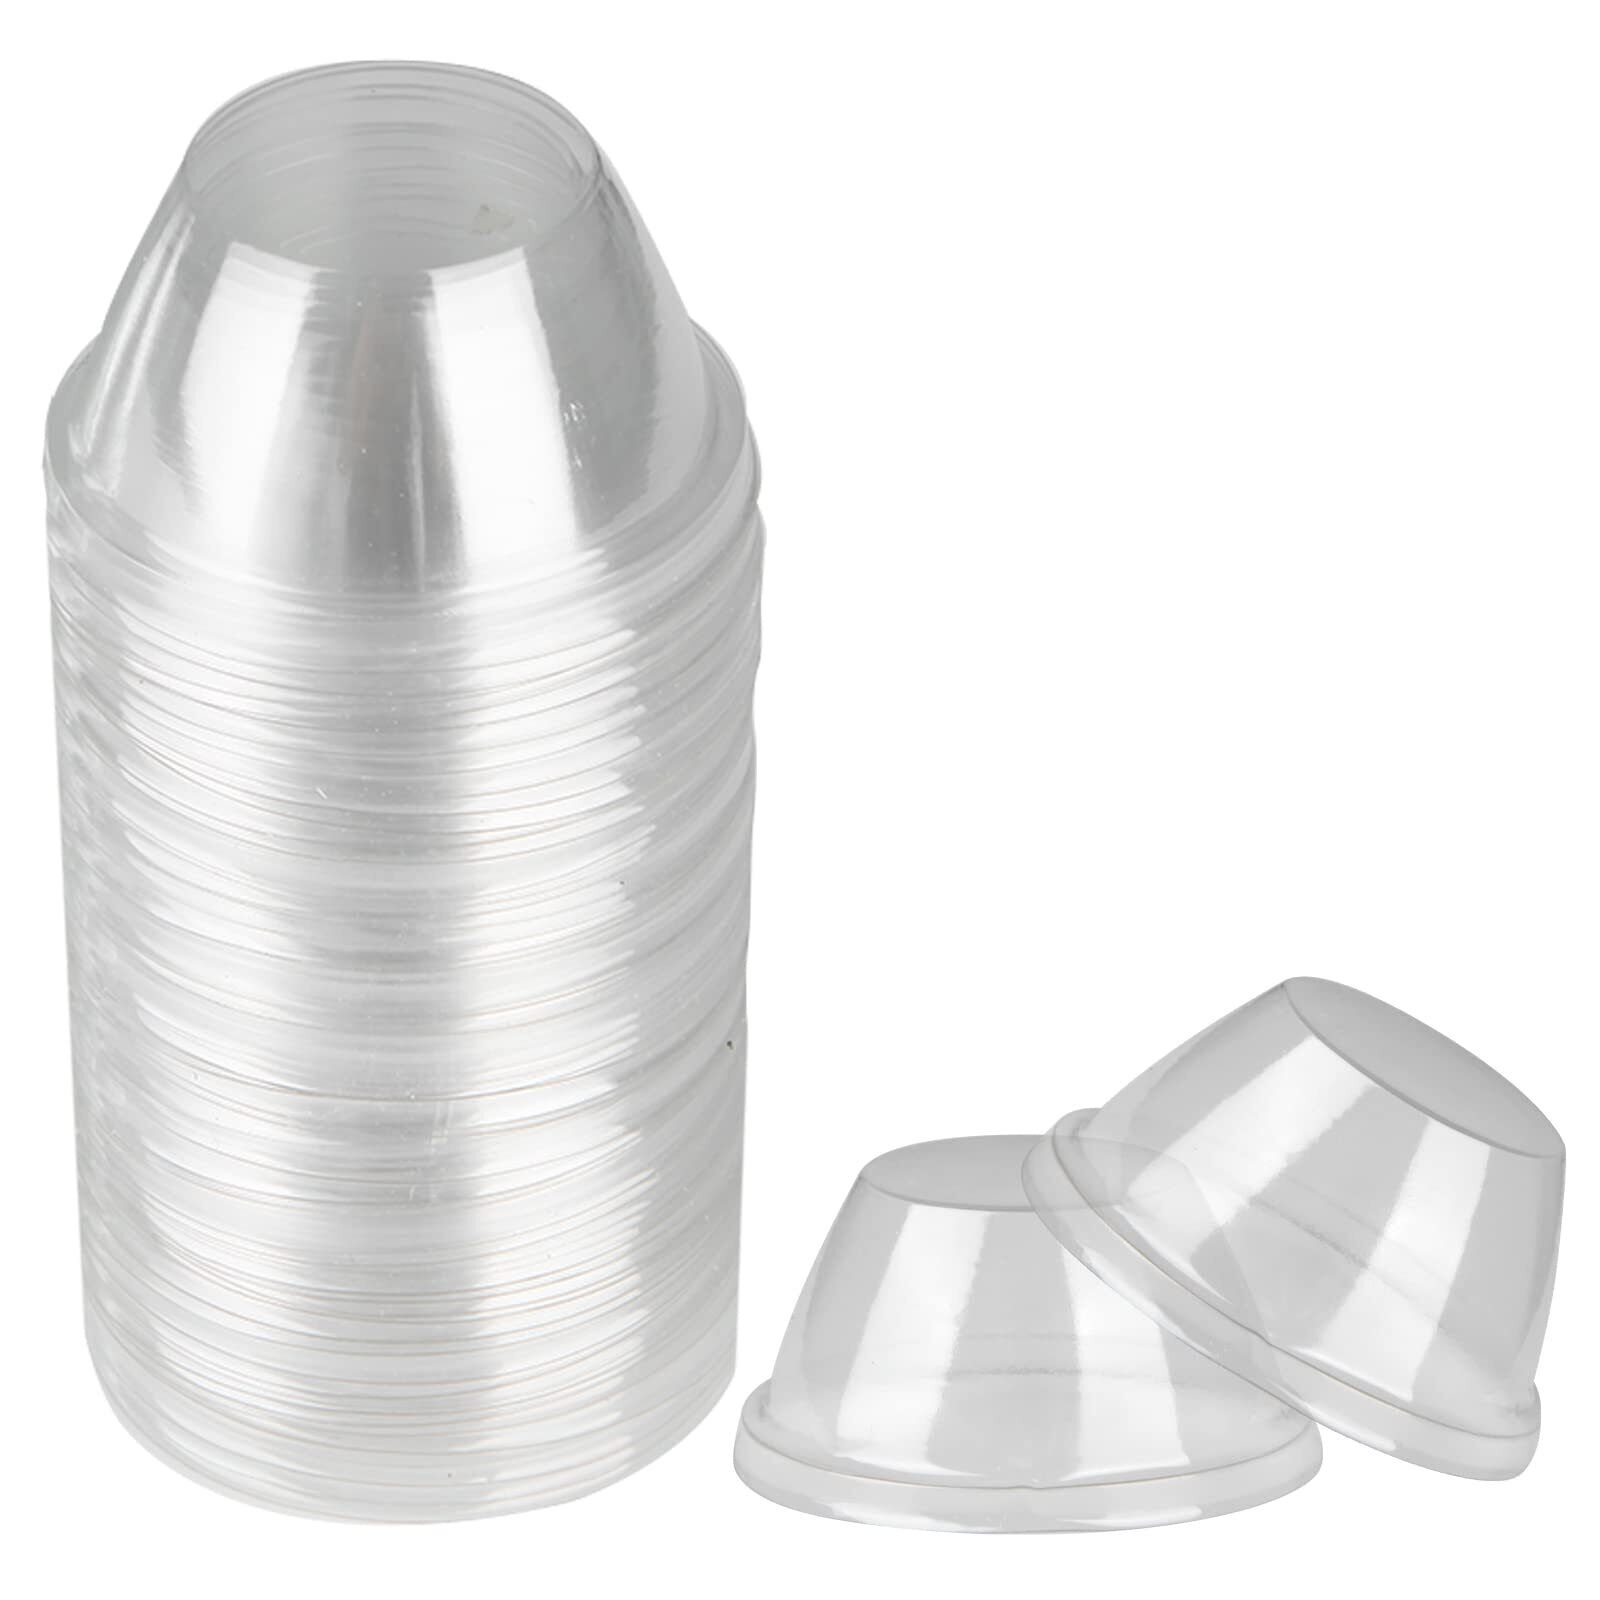 50 Pack Grow Domes Replacement Grow Dome Caps Compatible with AeroGarden